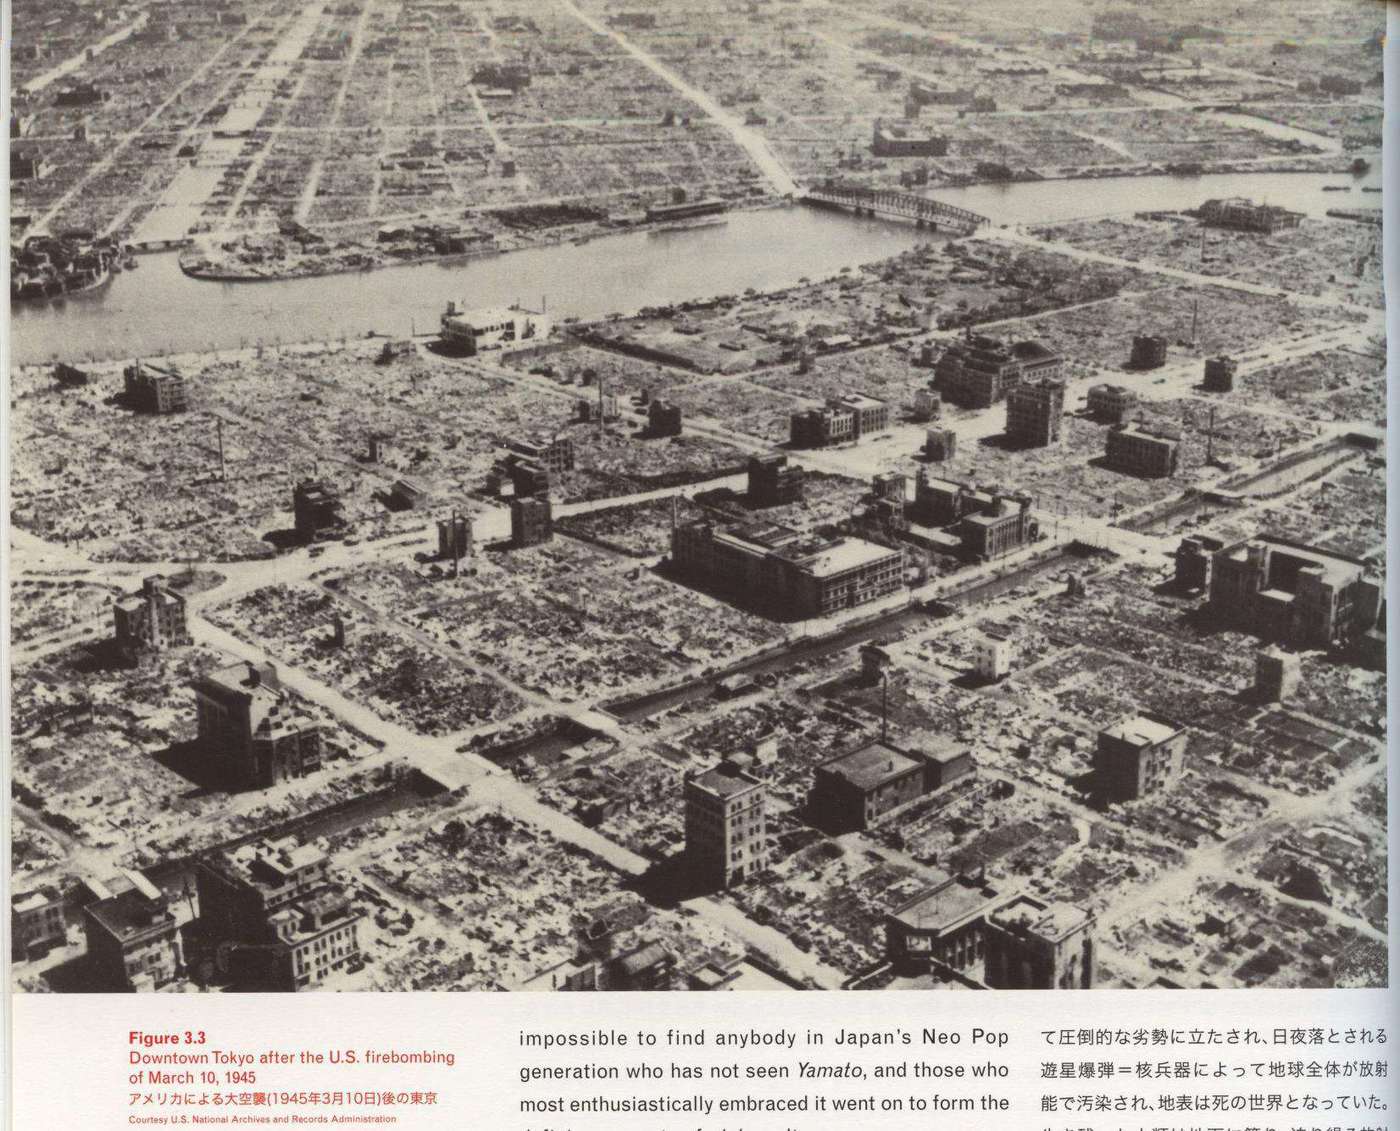 Caption left top: Downtown Tokyo after the U.S. firebombing of March 10, 1945